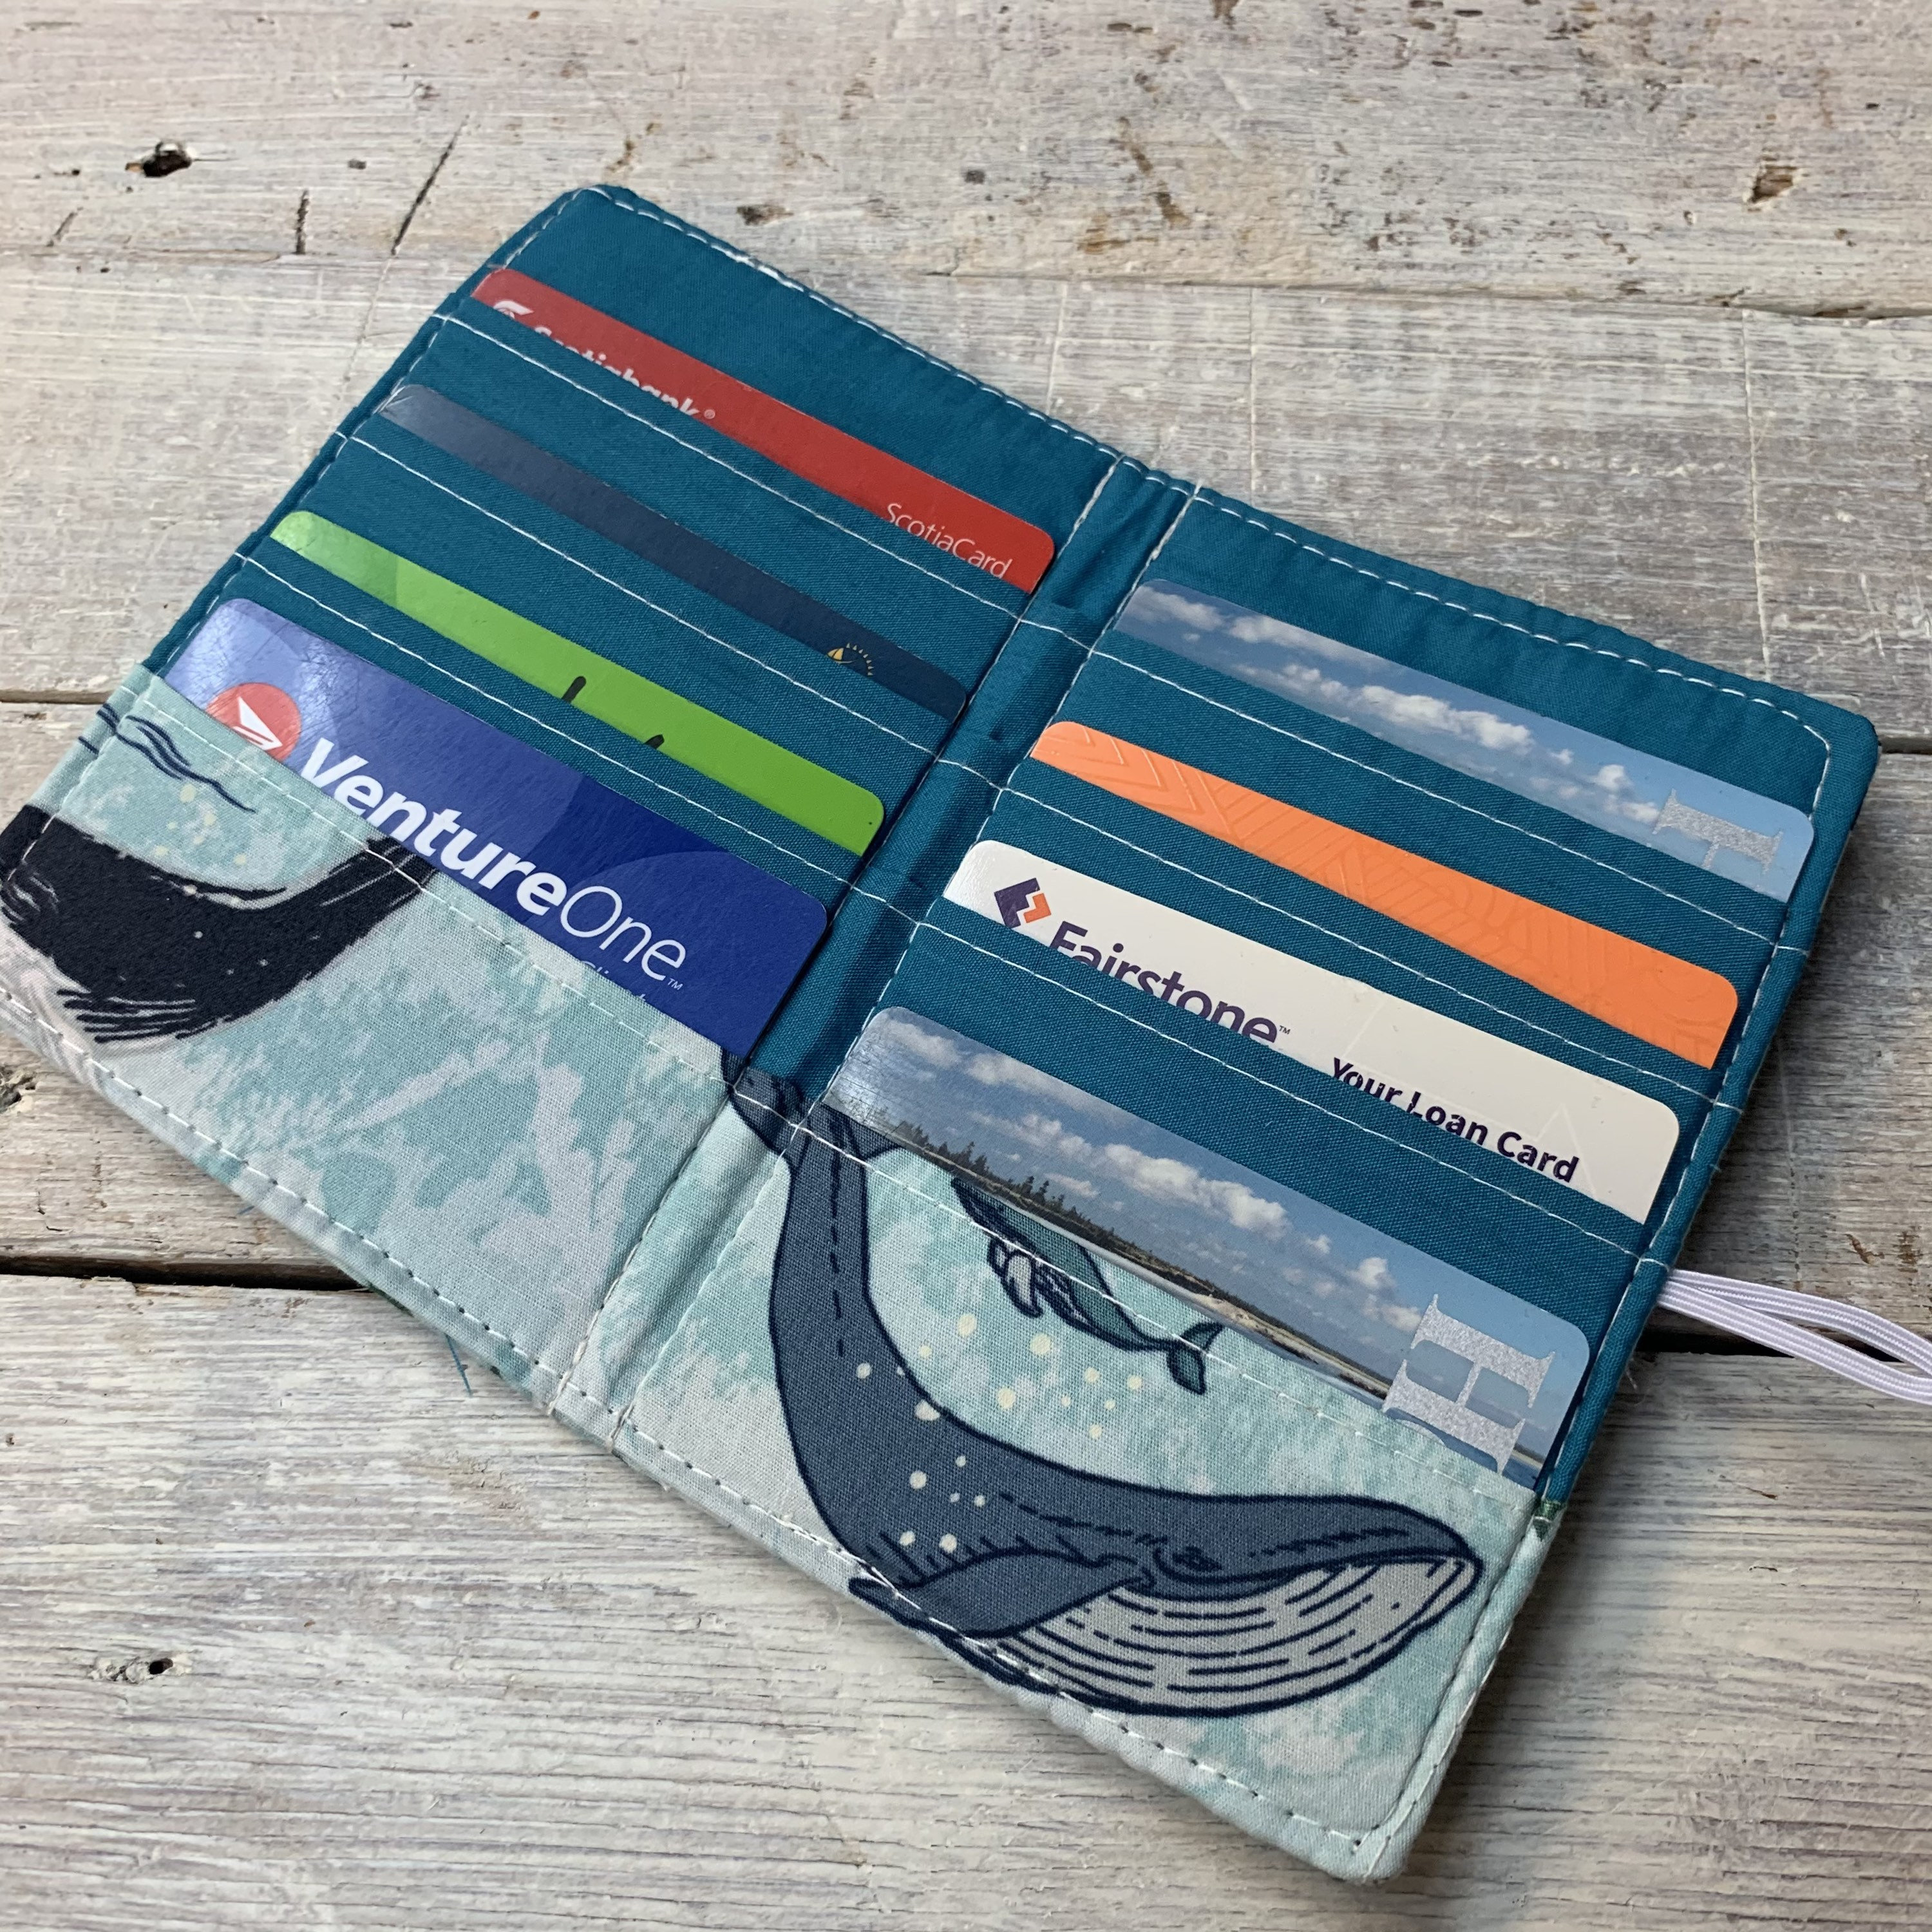 Vintage Ship, Whale and Hand Lettering Watercolor Ink Drawings Credit Card  Coin wallet, Key Change Organizer Zipper Purse Compact Clutch Pouch Pocket